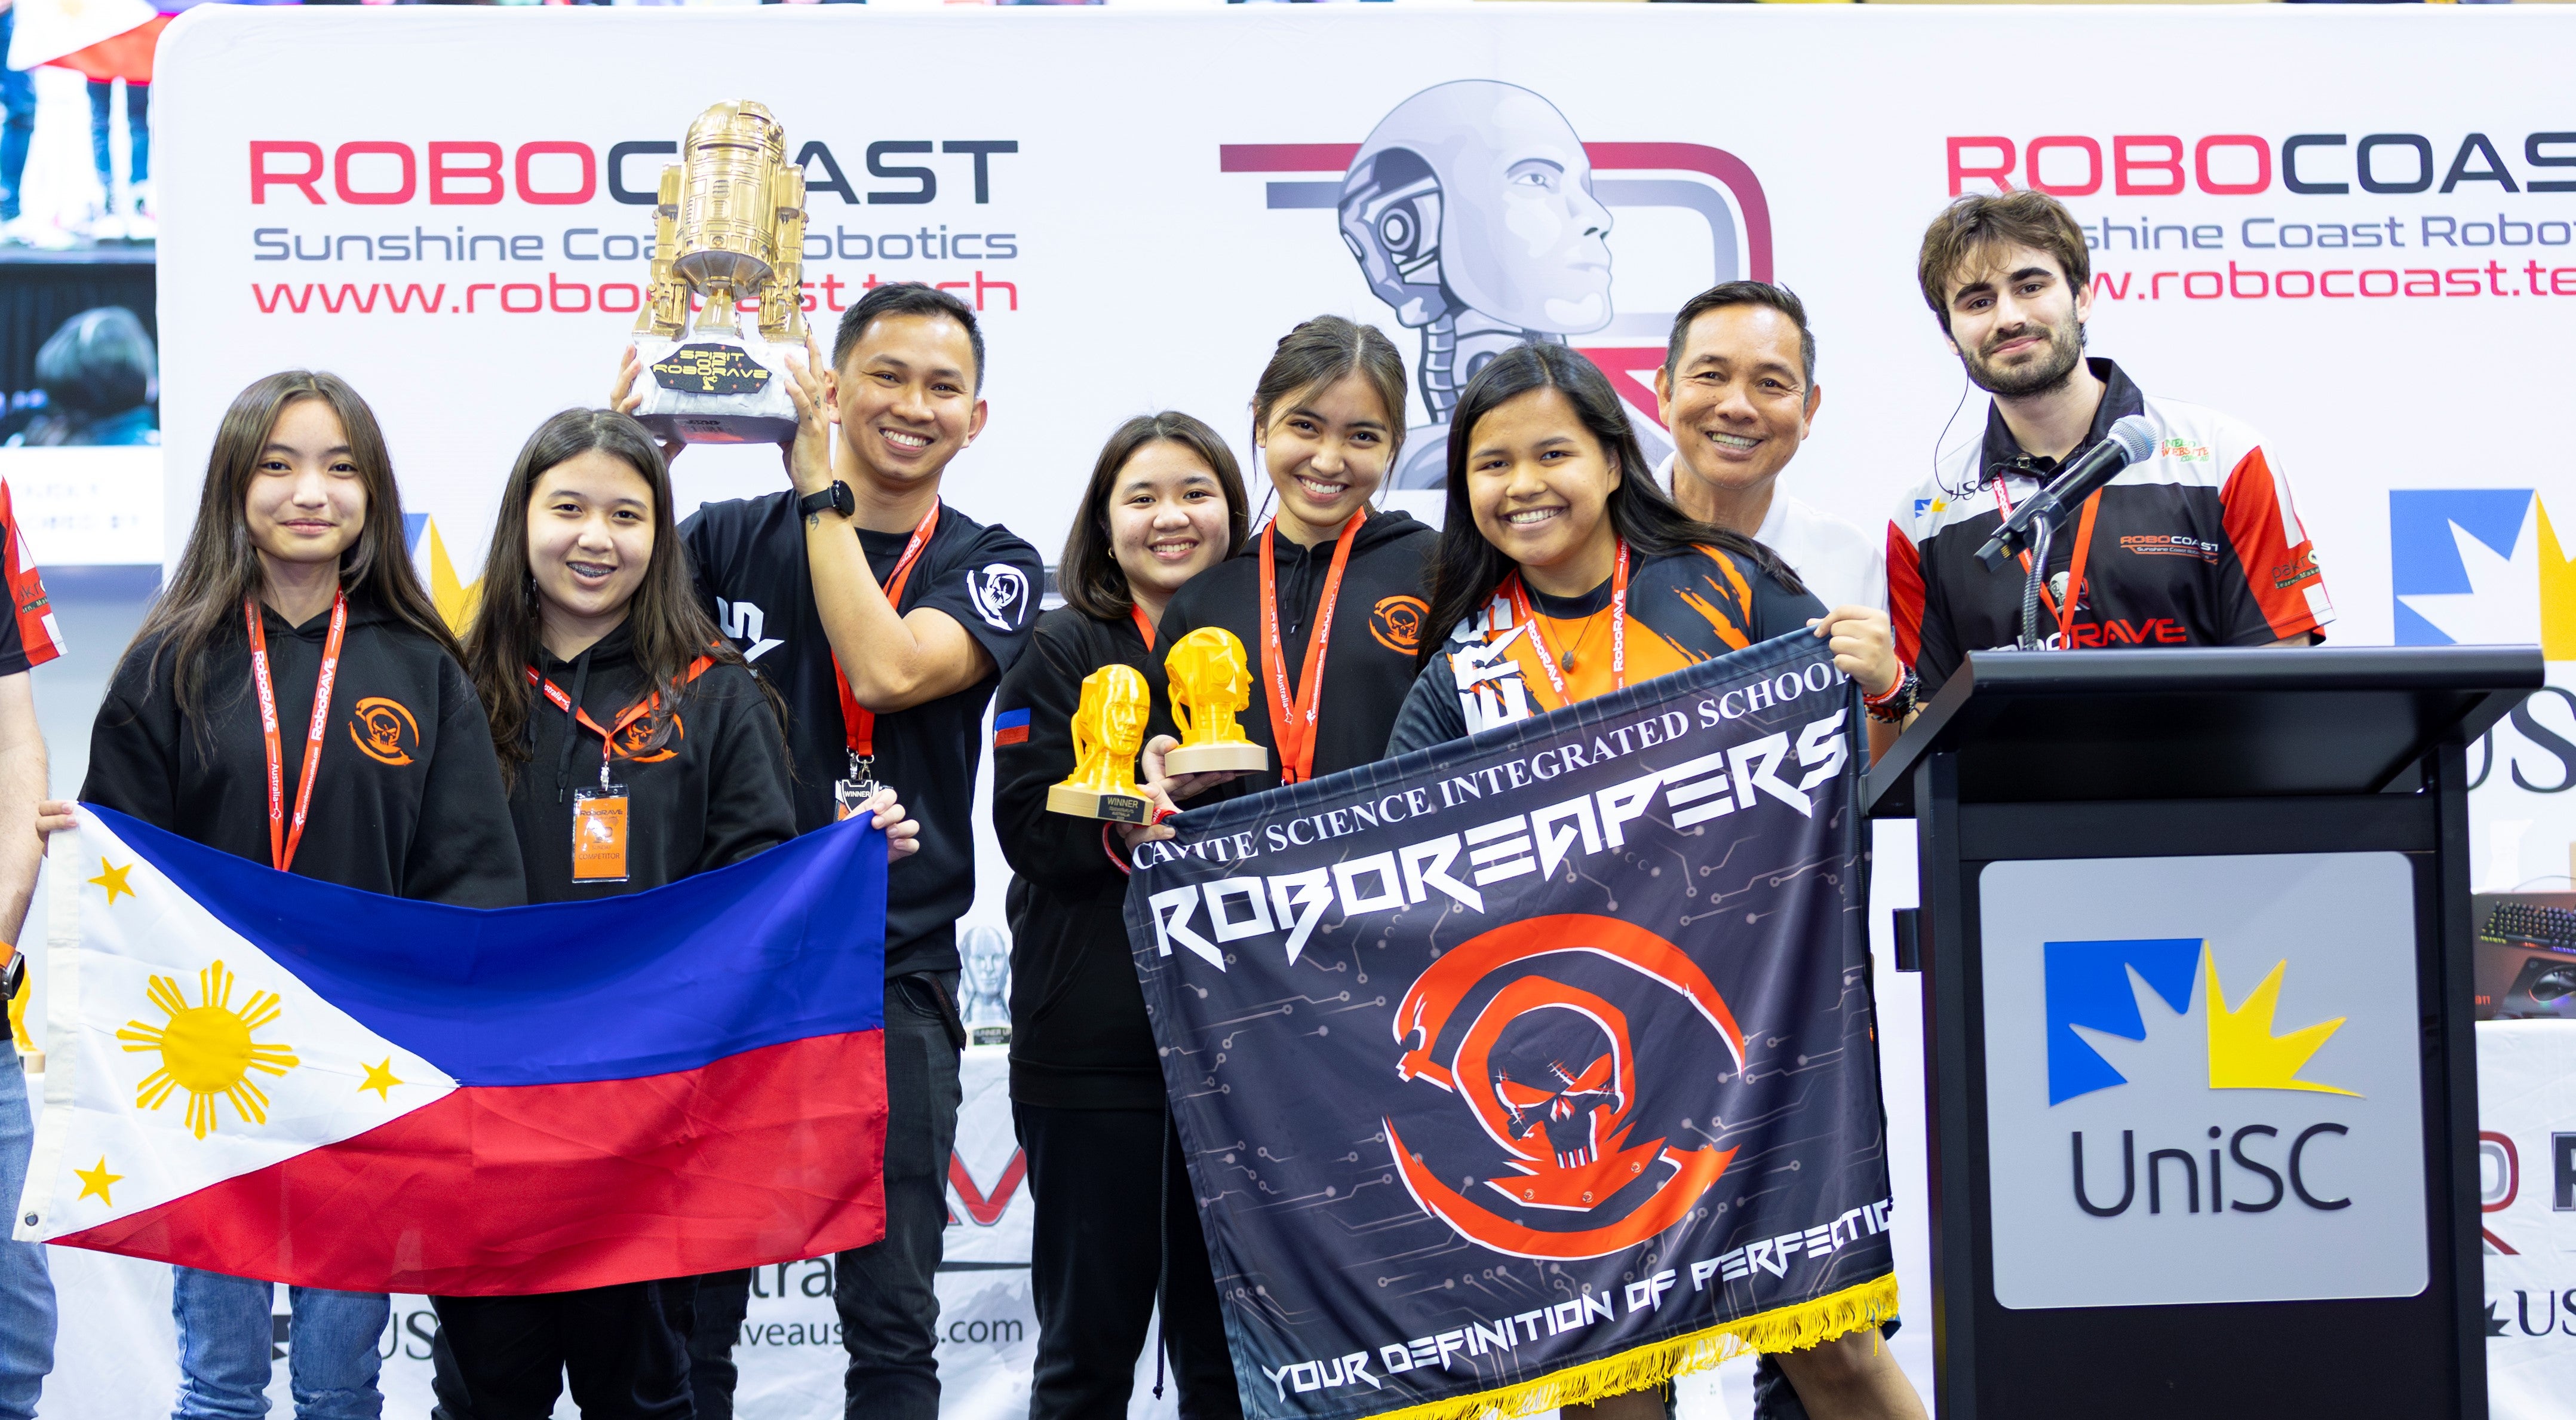 2023 Spirit of RoboRAVE winners from Cavite Science Integrated School in the Philippines. 